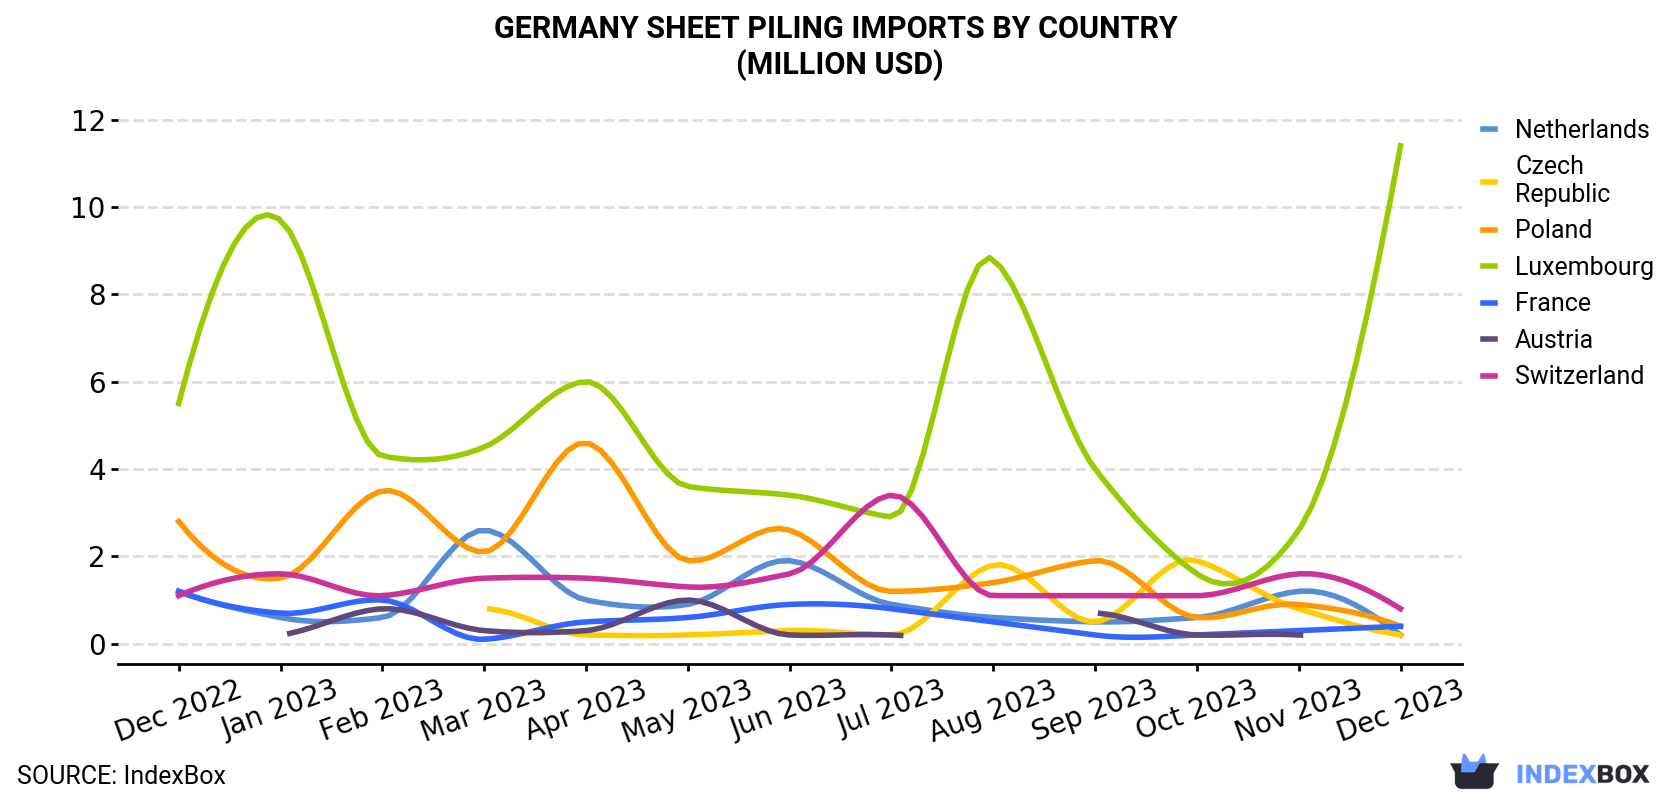 Germany Sheet Piling Imports By Country (Million USD)